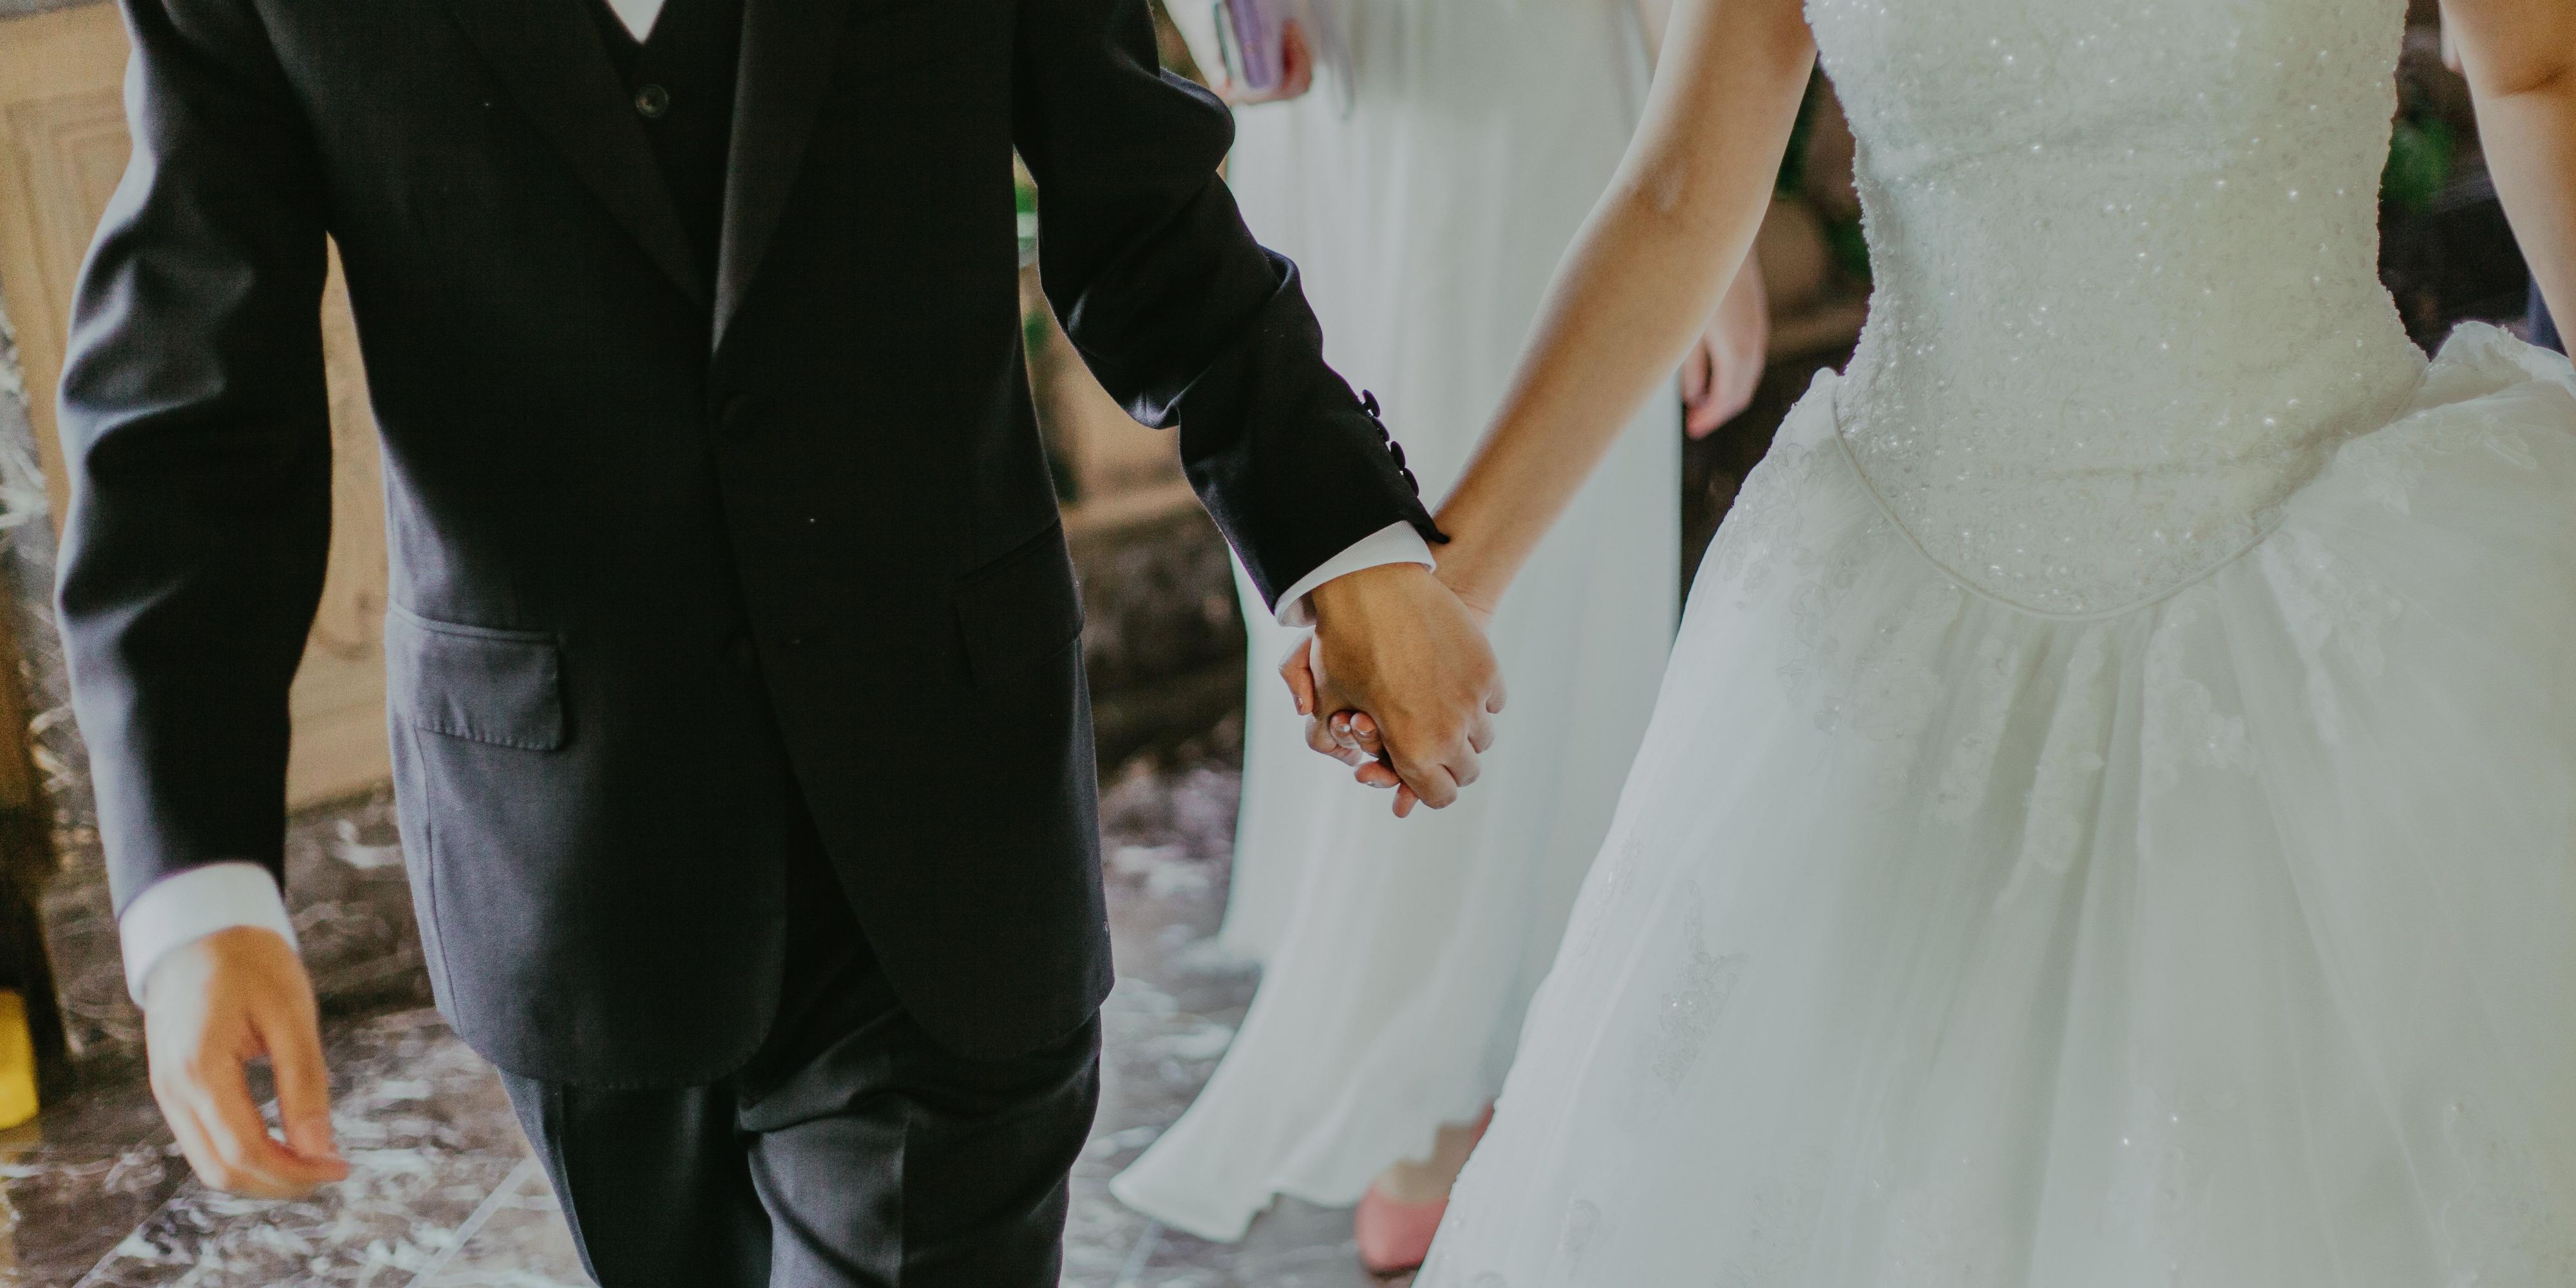 Calling all brides and grooms! Come stay with us here at the Holiday Inn Express ad Suites after your wedding. We have large, cozy beds and even better?! We have large suites with a couch for the two of you to relax on after your nuptials. Give us a call today! 